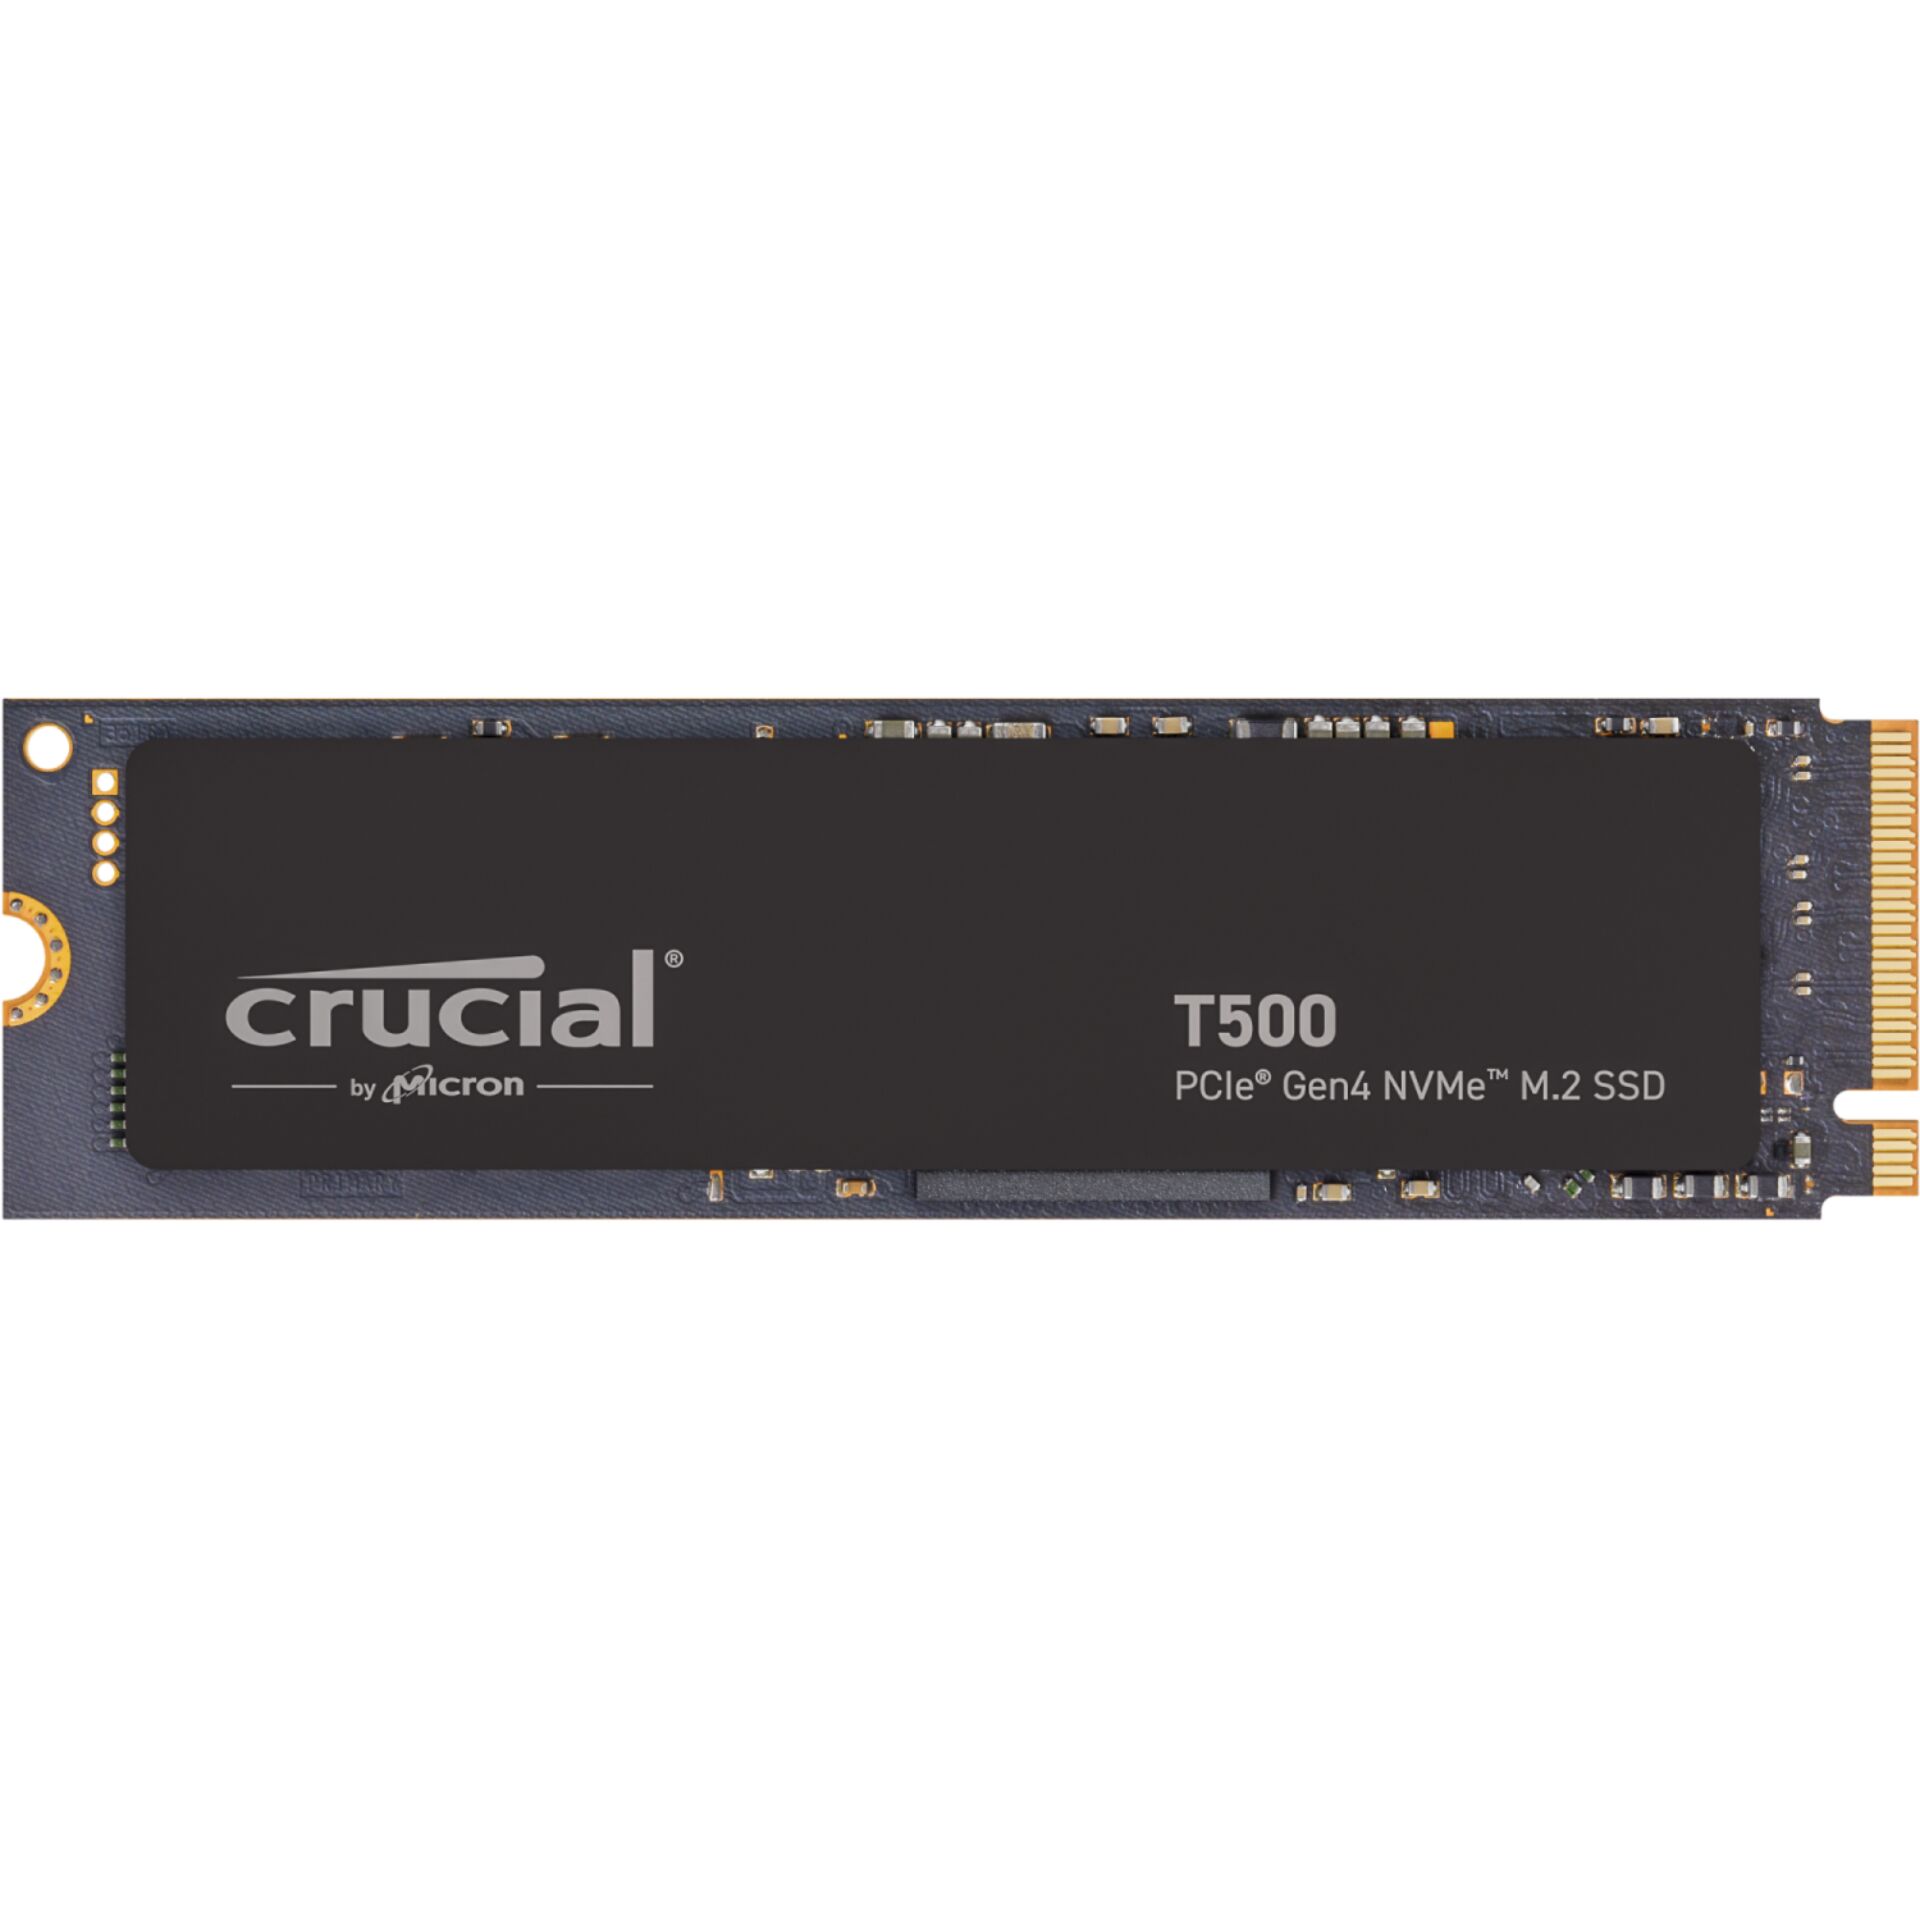 2.0 TB SSD Crucial T500 SSD, M.2/M-Key (PCIe 4.0 x4), lesen: 7400MB/s, schreiben: 7000MB/s SLC-Cached, TBW: 1.2PB